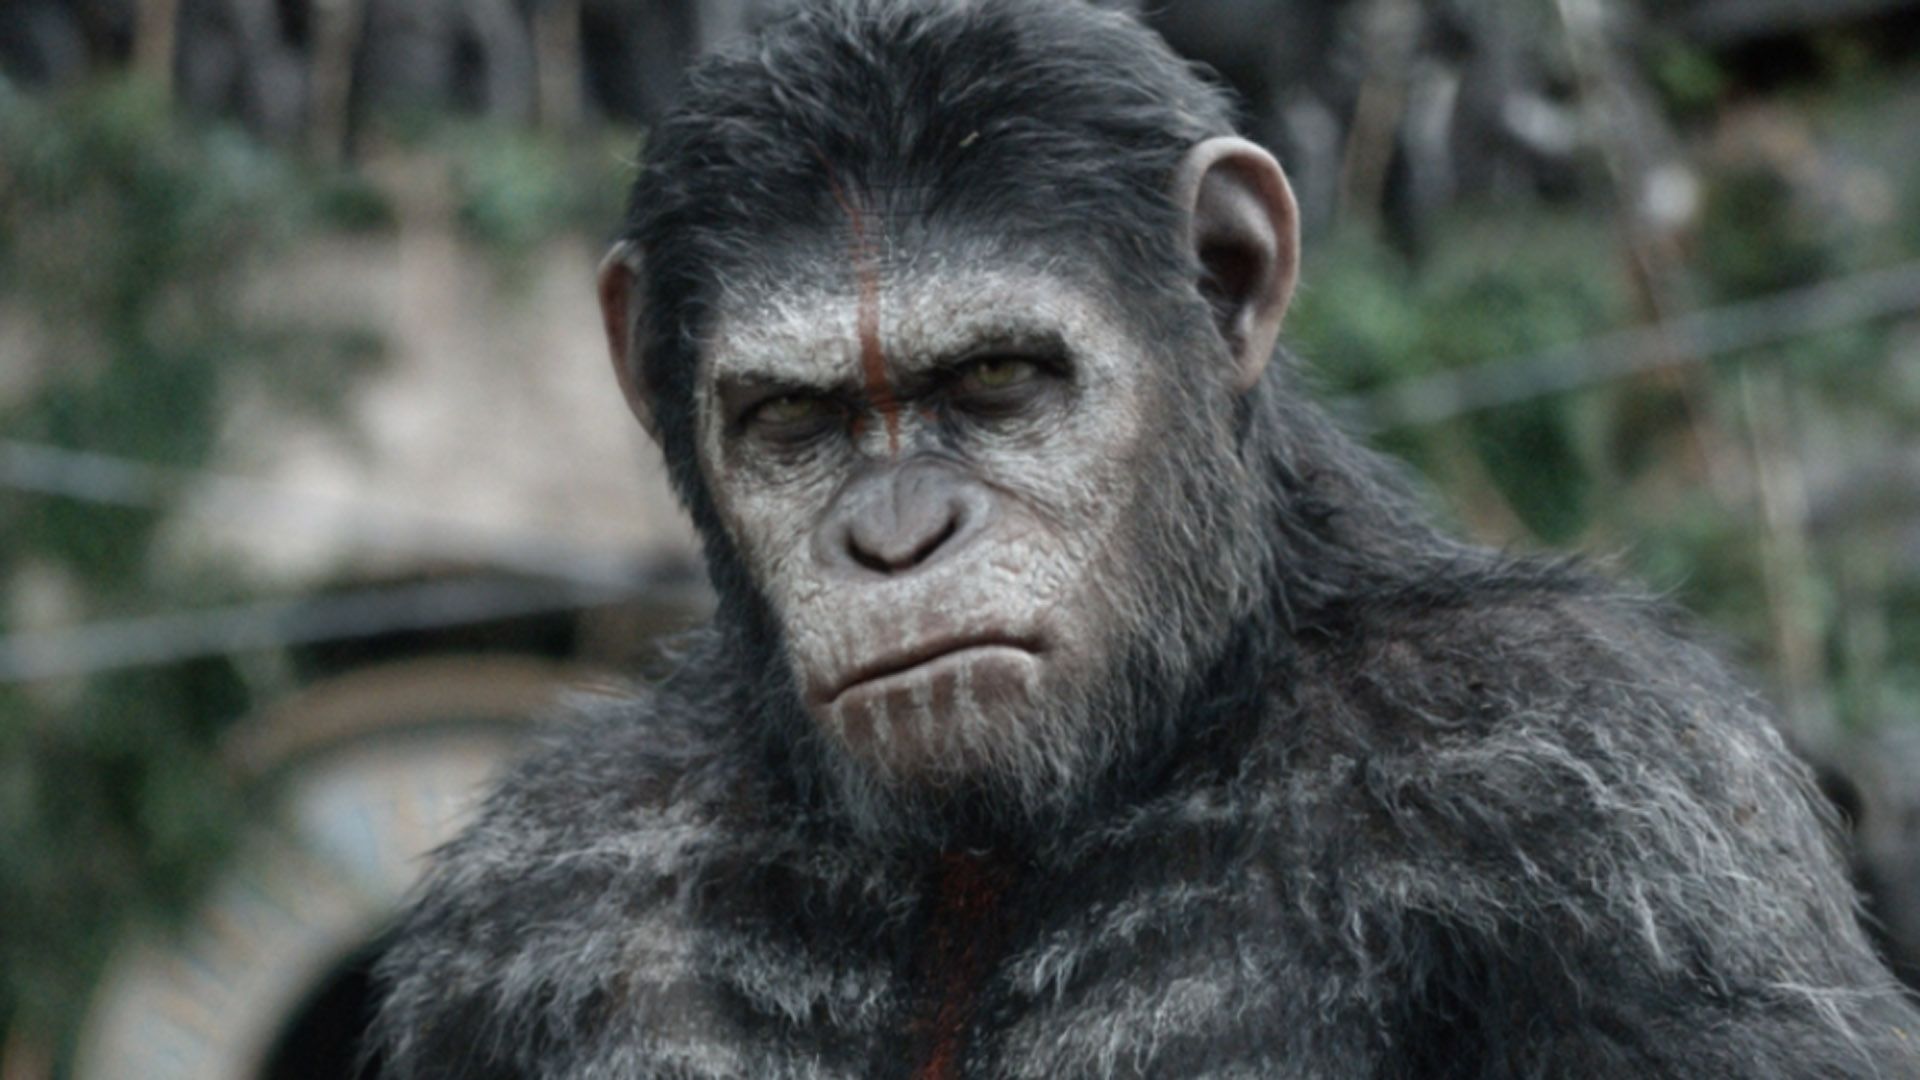 Watch: 'Planet of the Apes' Short Films Document Gap Between 'Rise